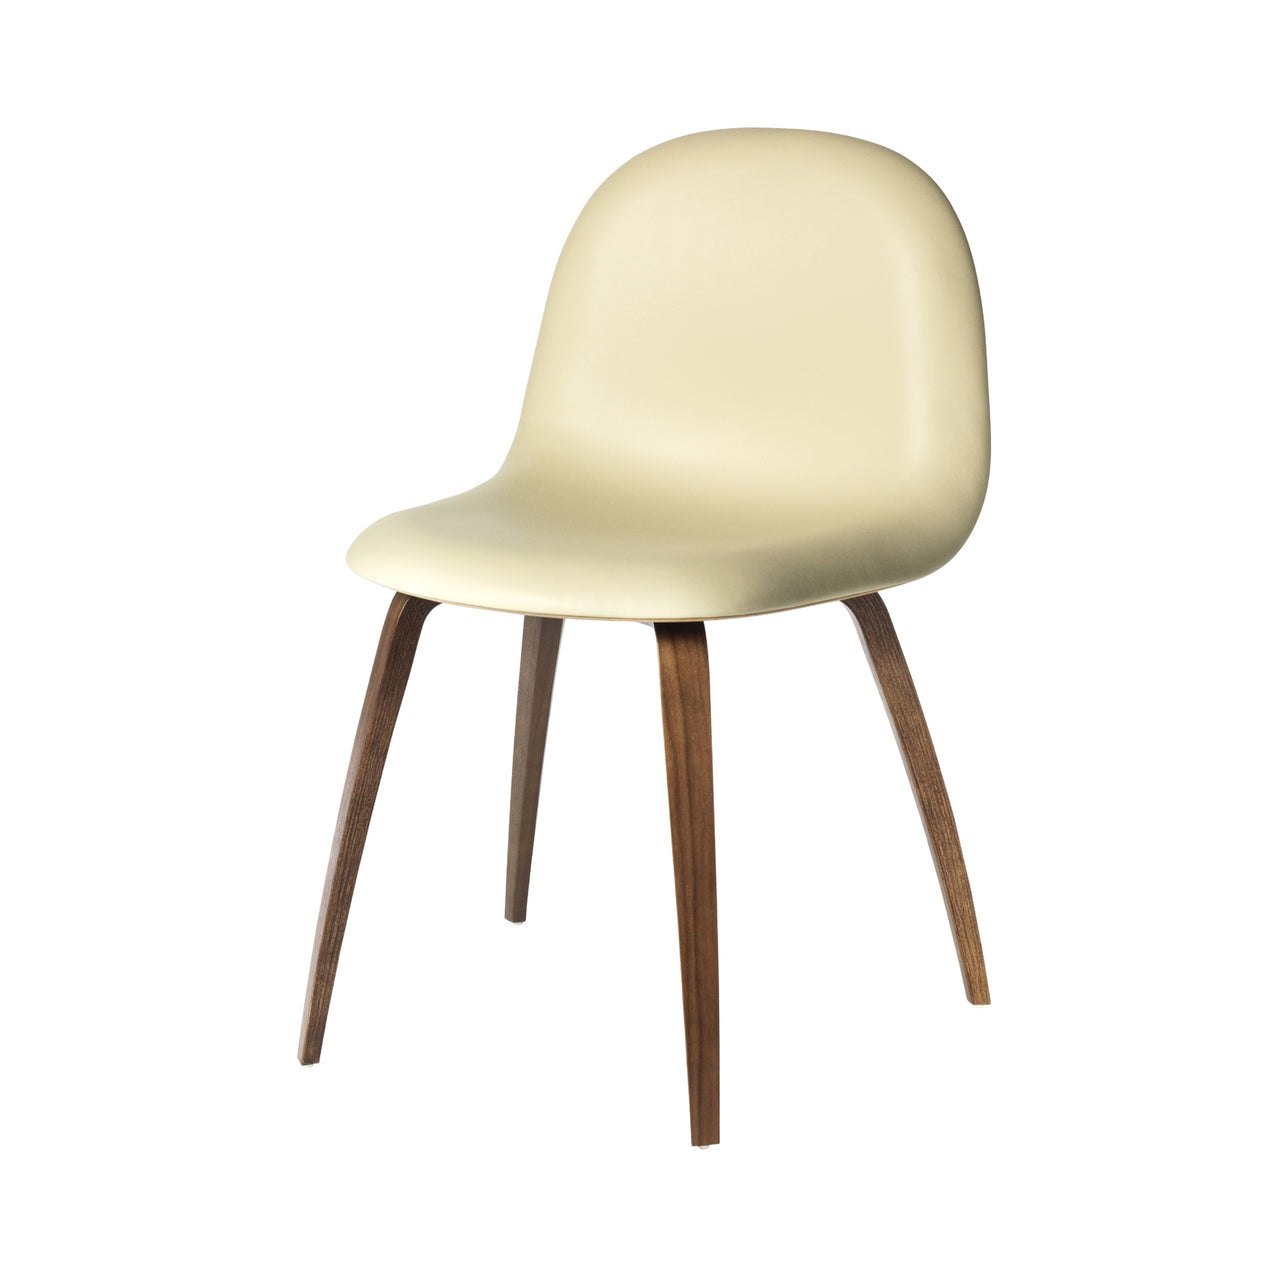 3D Dining Chair: Wood Base + Front Upholstery + American Walnut